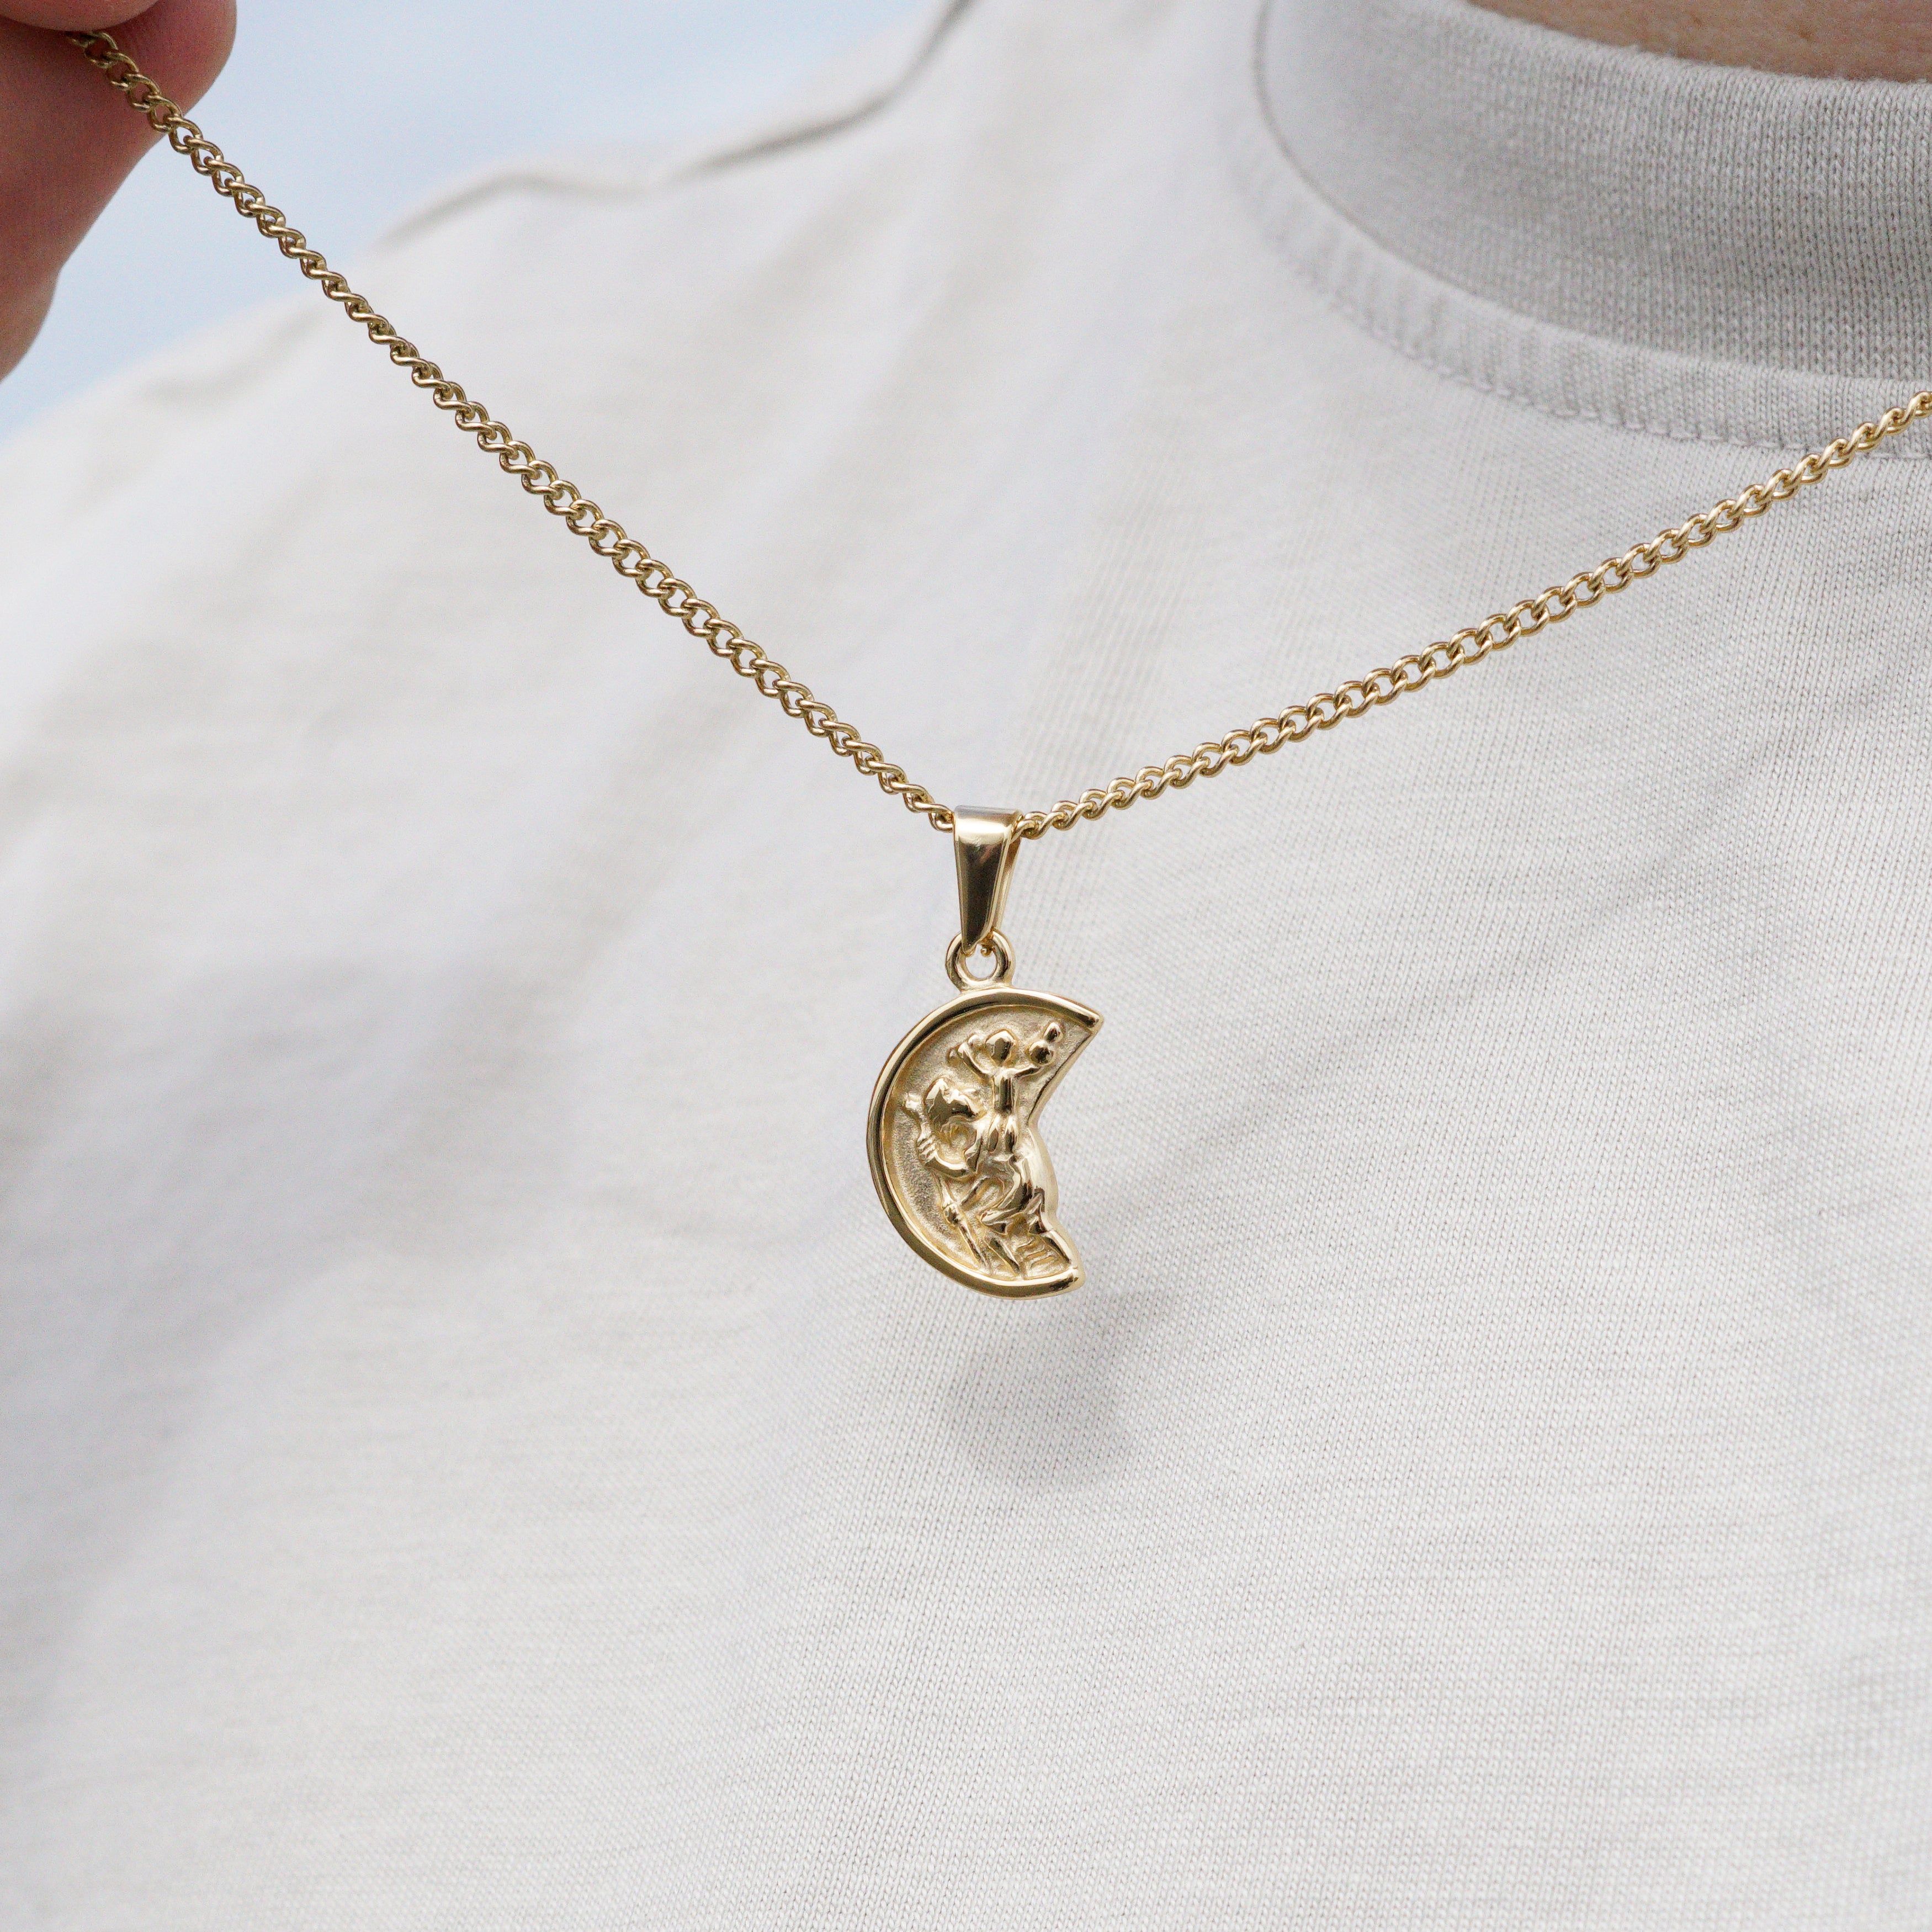 MOON NECKLACE - GOLD TONE